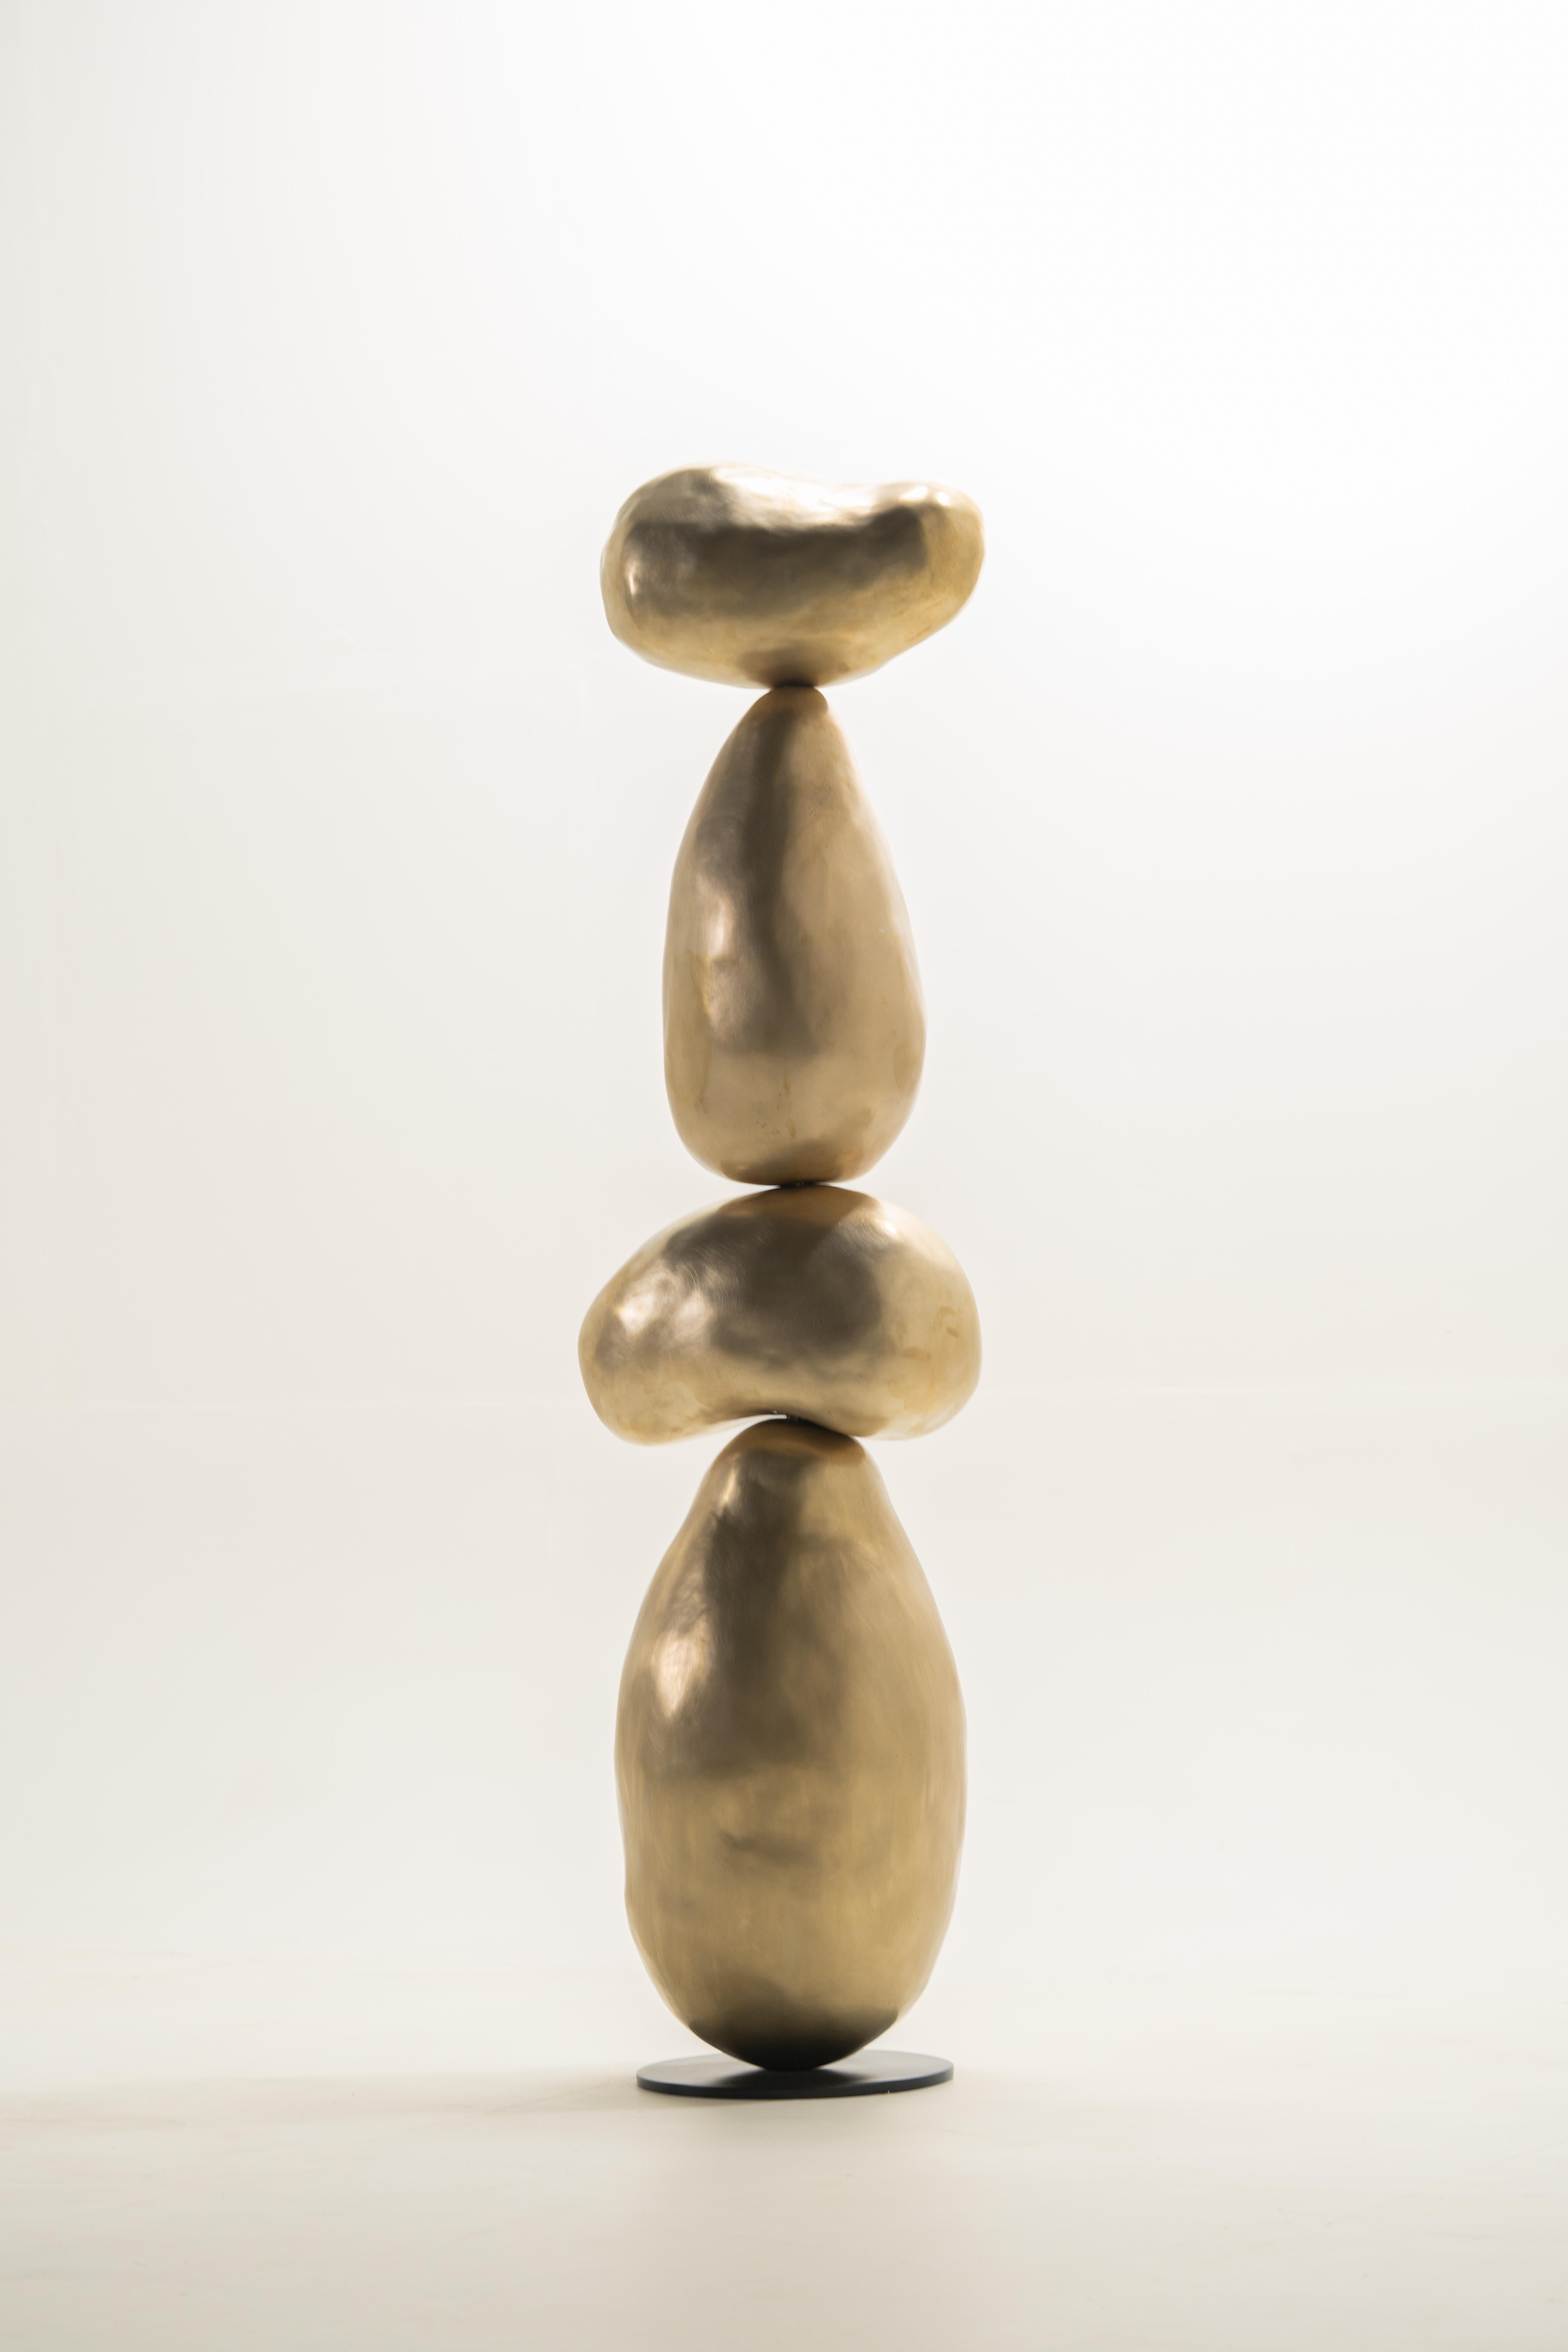 A sculpture that works with the wonderful vibrations that are meant to come to your home. Layer by layer. Totem I is a conversation piece to reflect at and elevate. In pure natural brass.
The totem pole is hand cast in brass with our signature